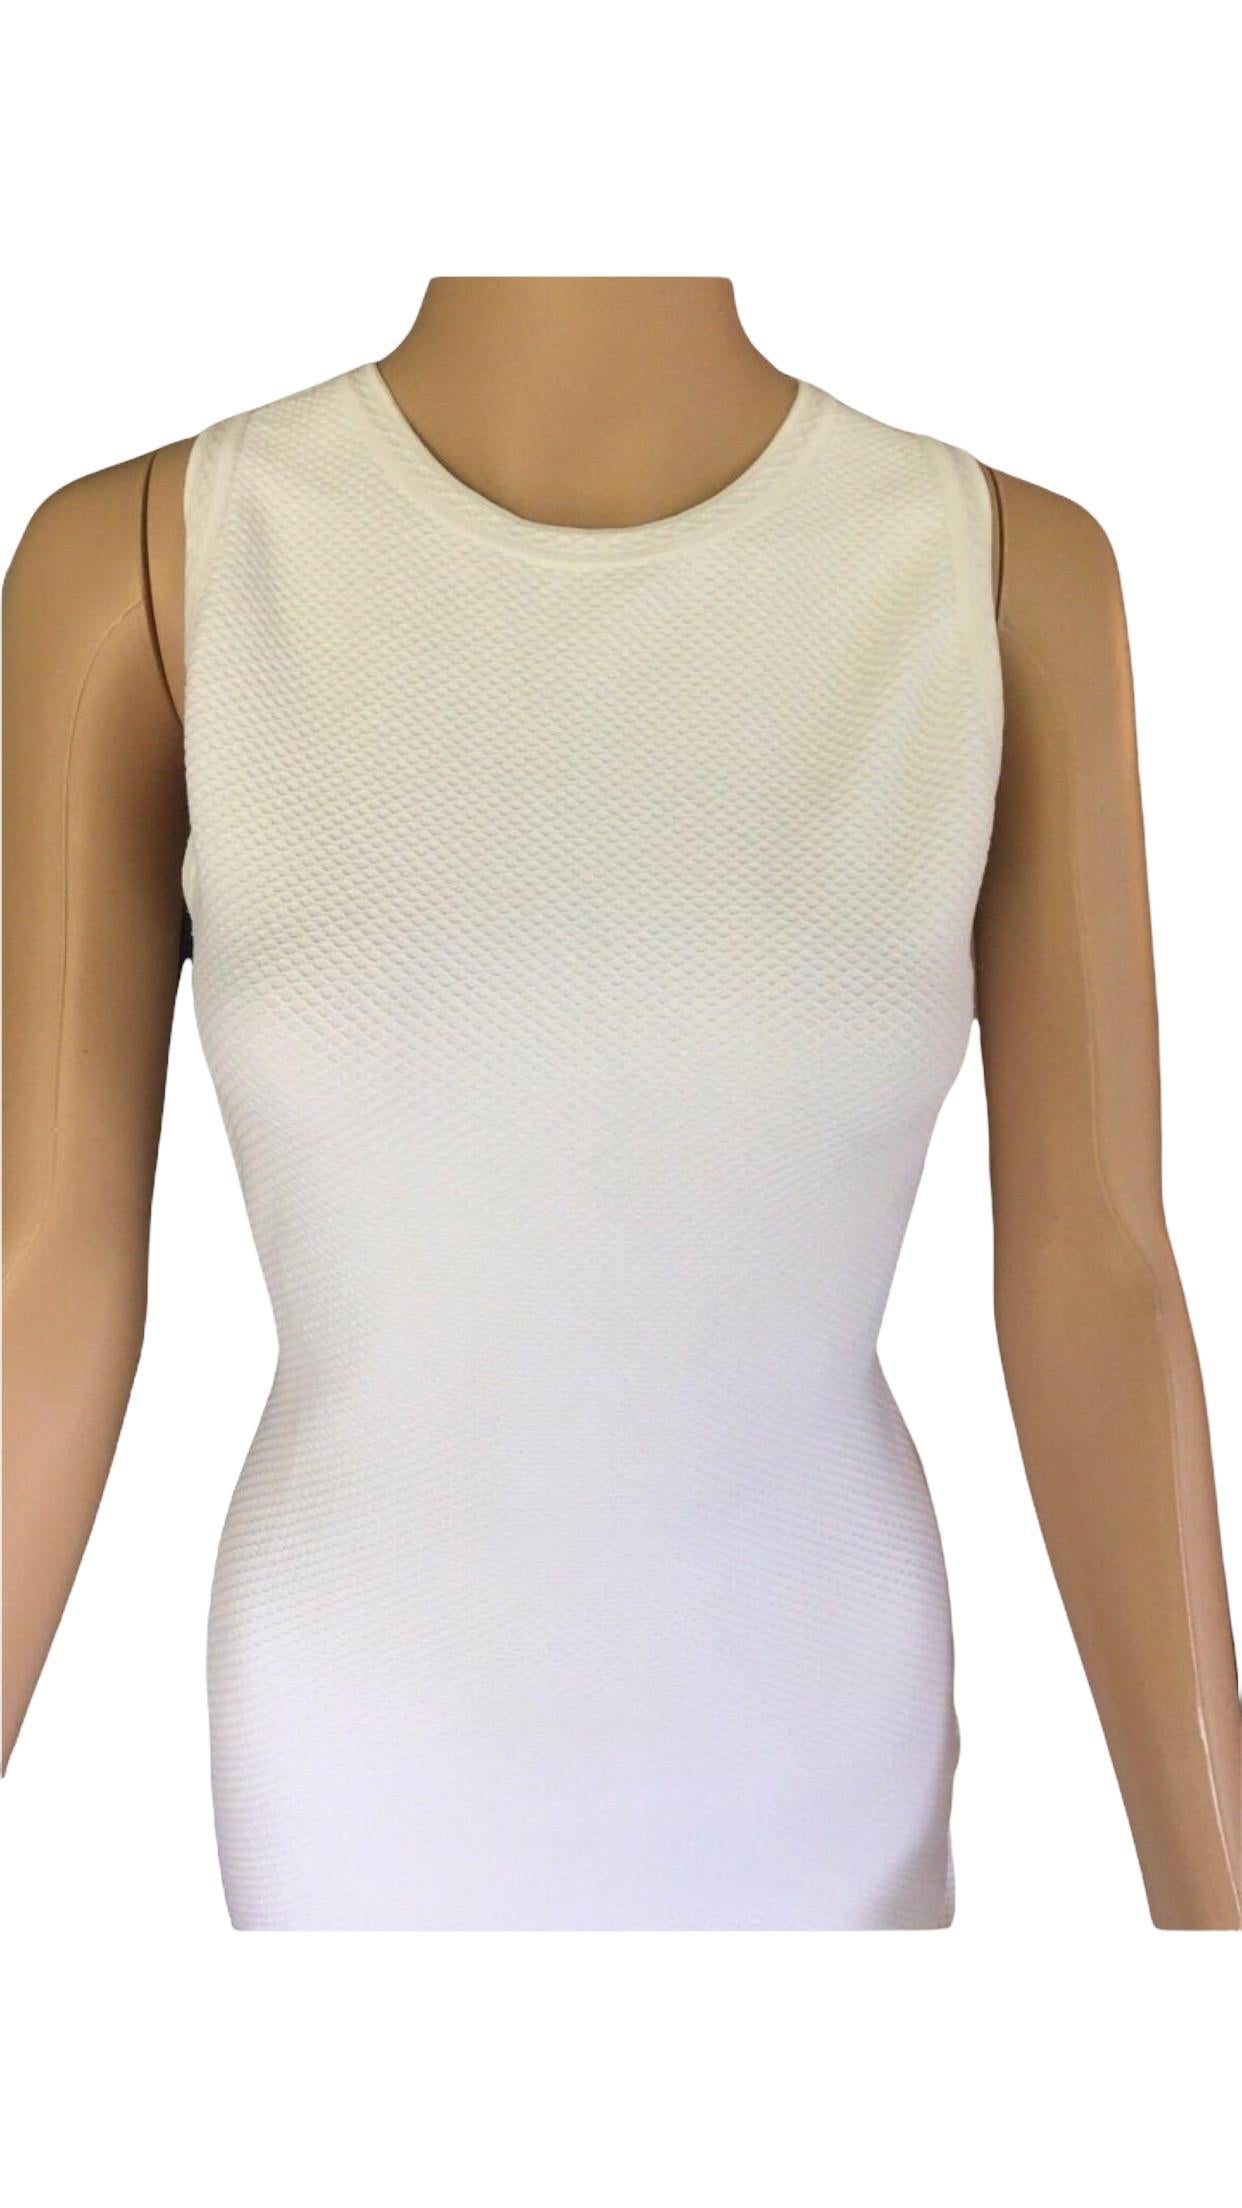 Azzedine Alaia Fitted Open Back White Dress In Excellent Condition For Sale In Naples, FL